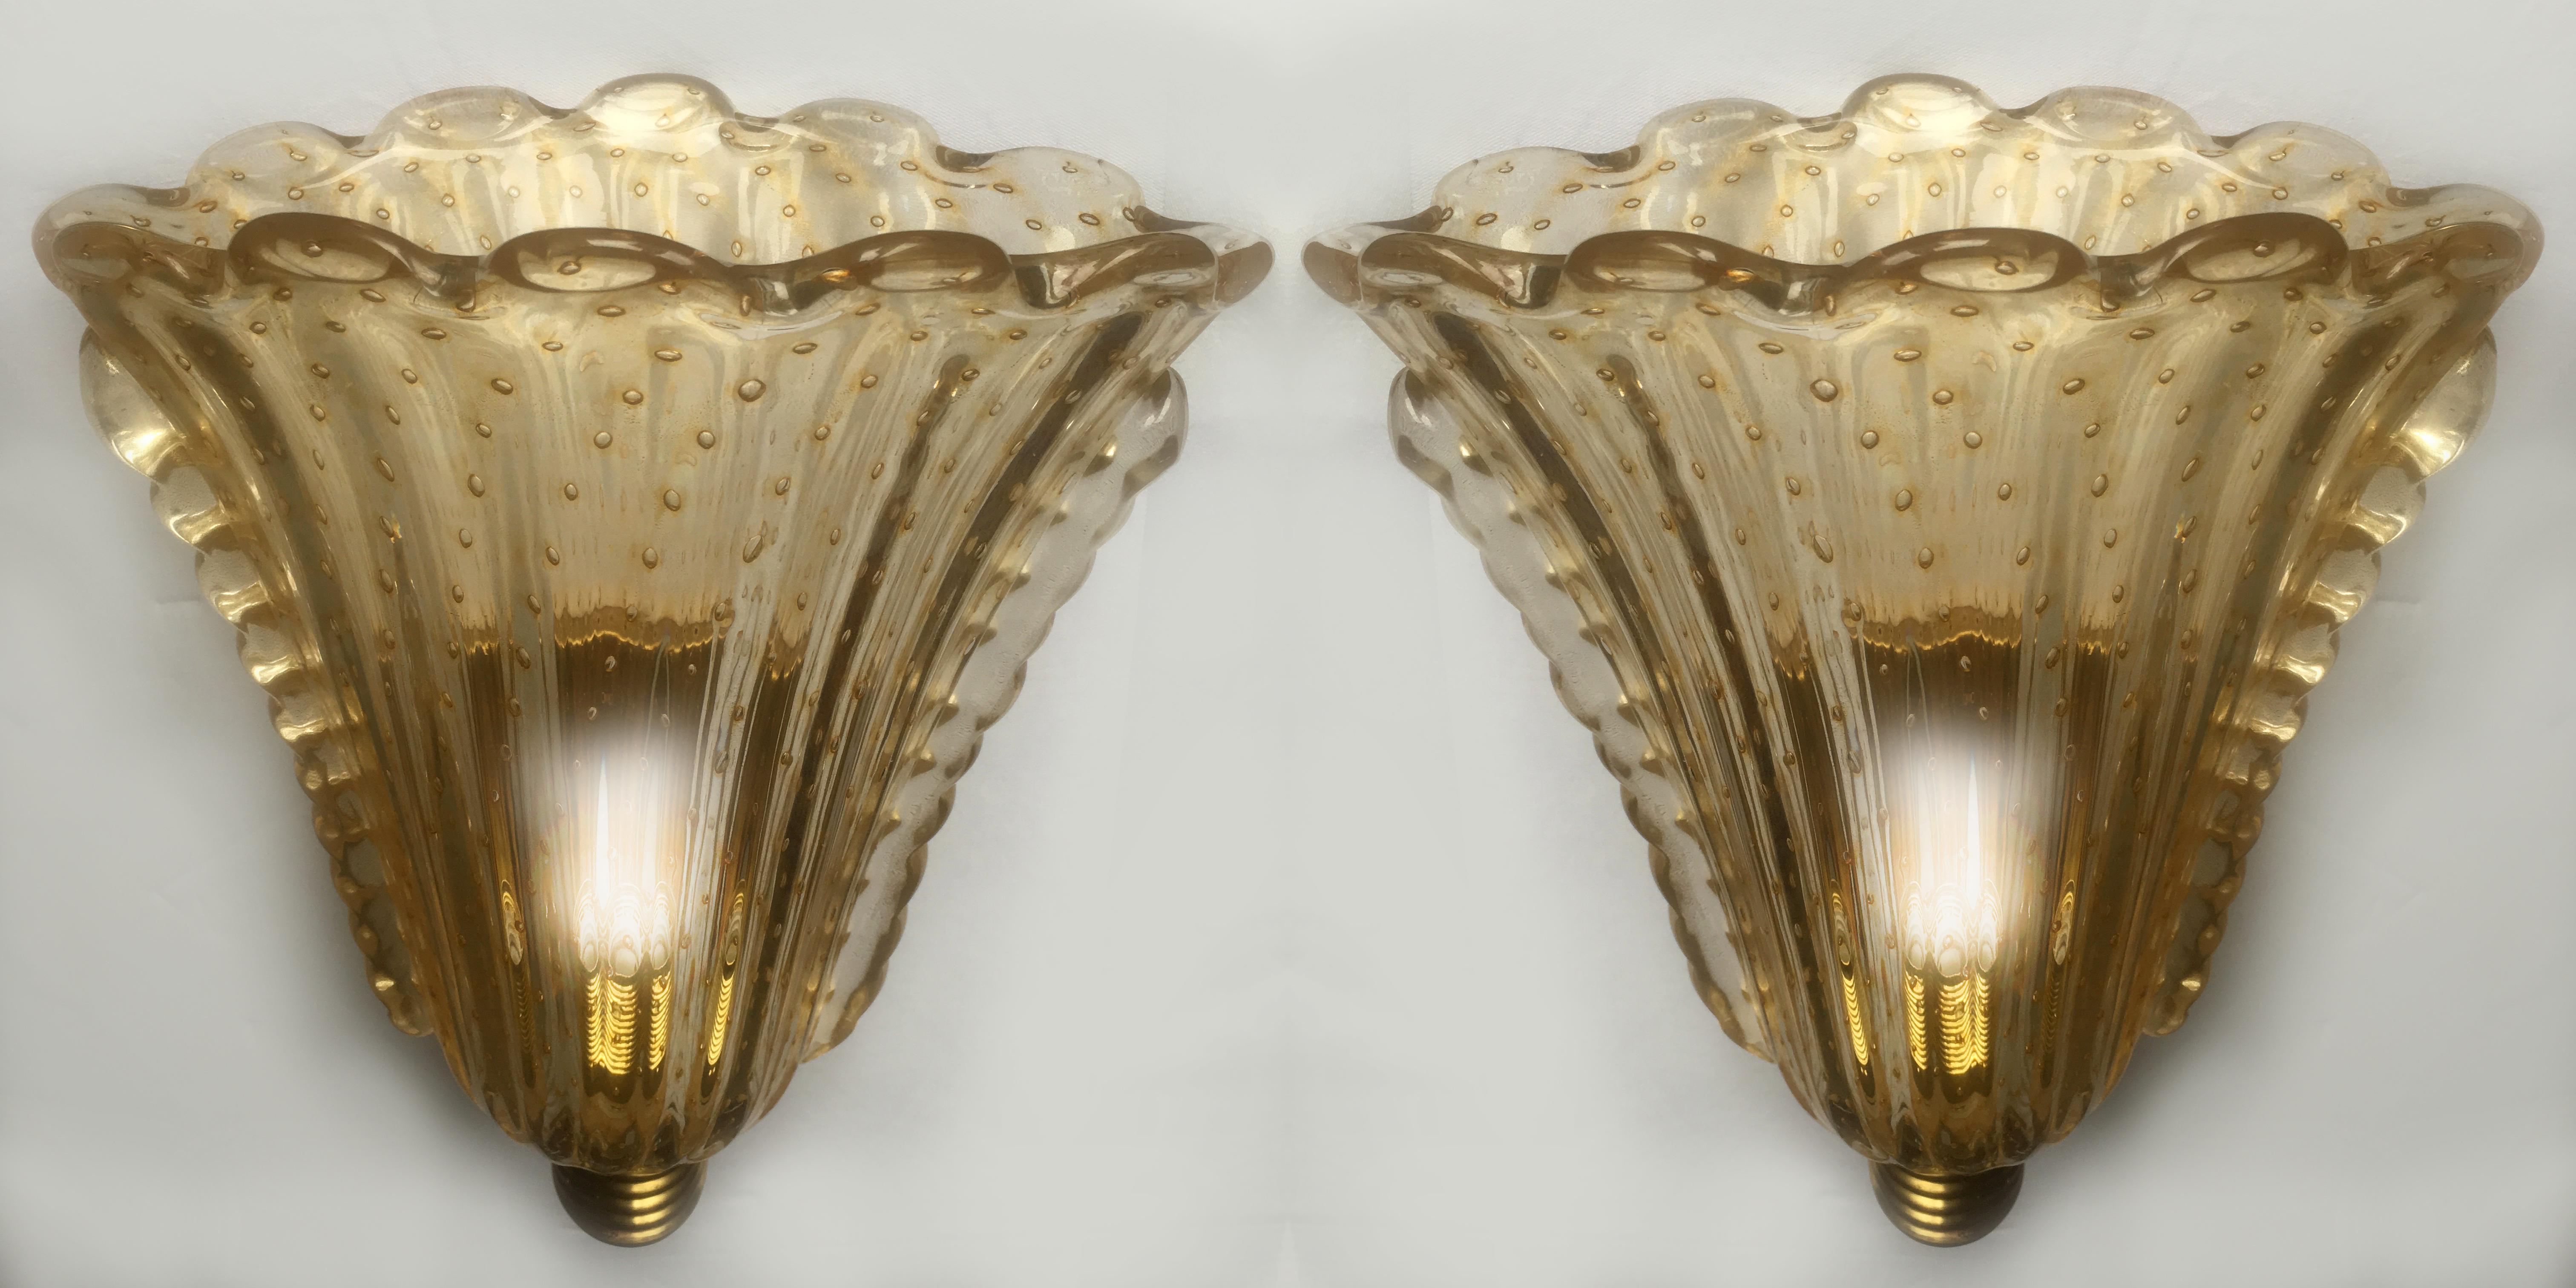 Italian Fabulous Pair of Sconces 24-Karat Gold by Barovier and Toso, Murano, 1950s